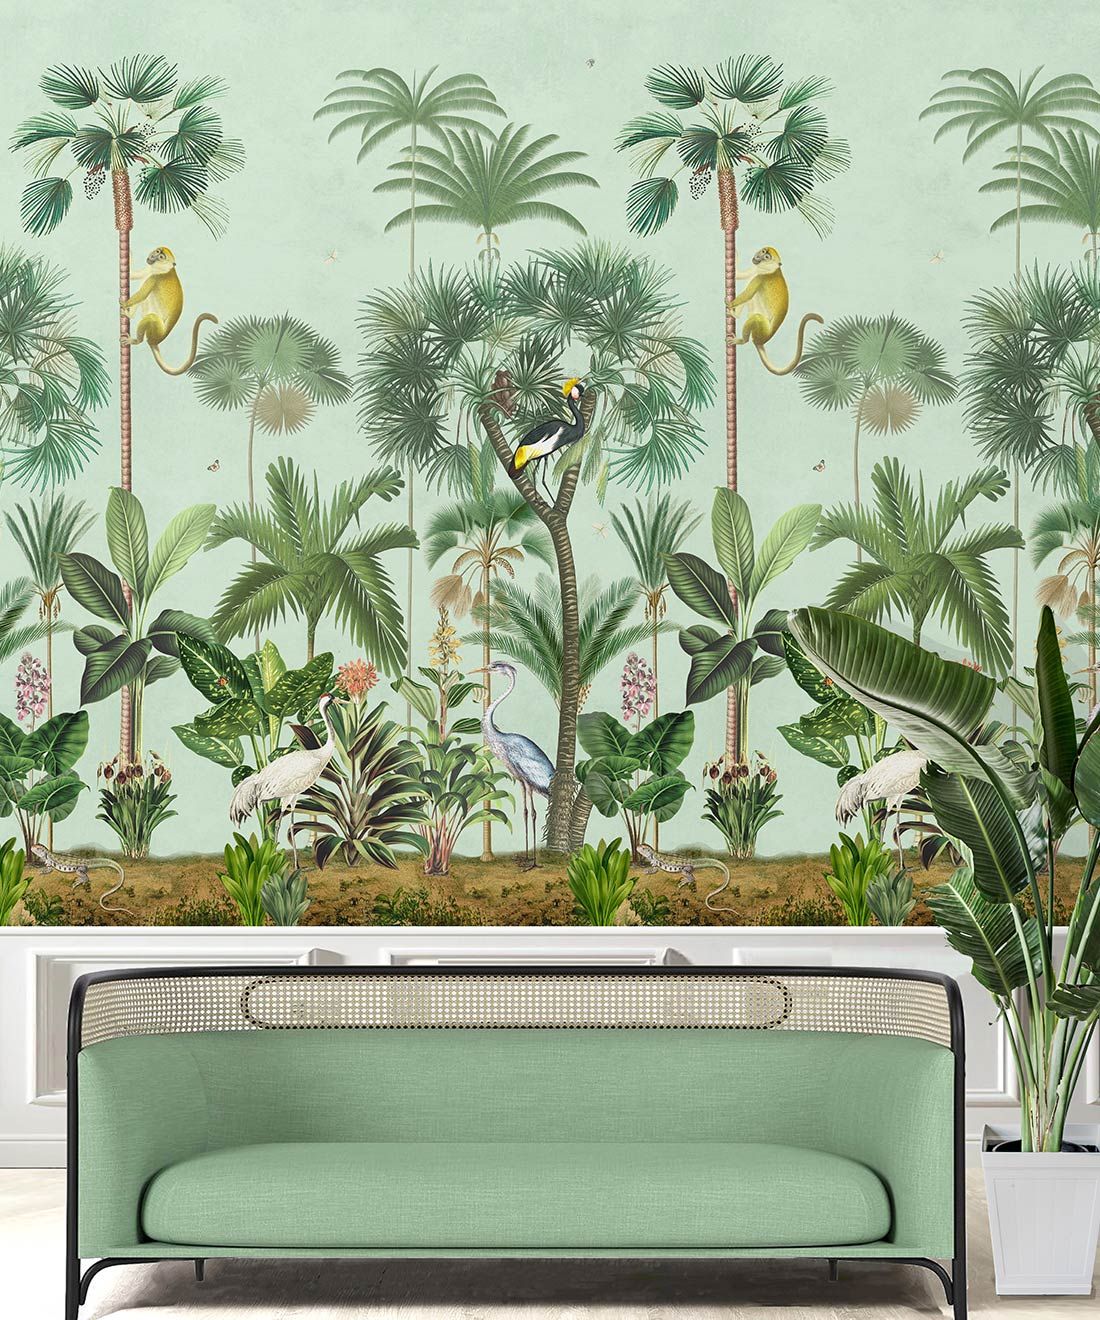 Indian Summer Wallpaper Mural •Bethany Linz • Palm Tree Mural • Blue • Inisitu with mint green sofa